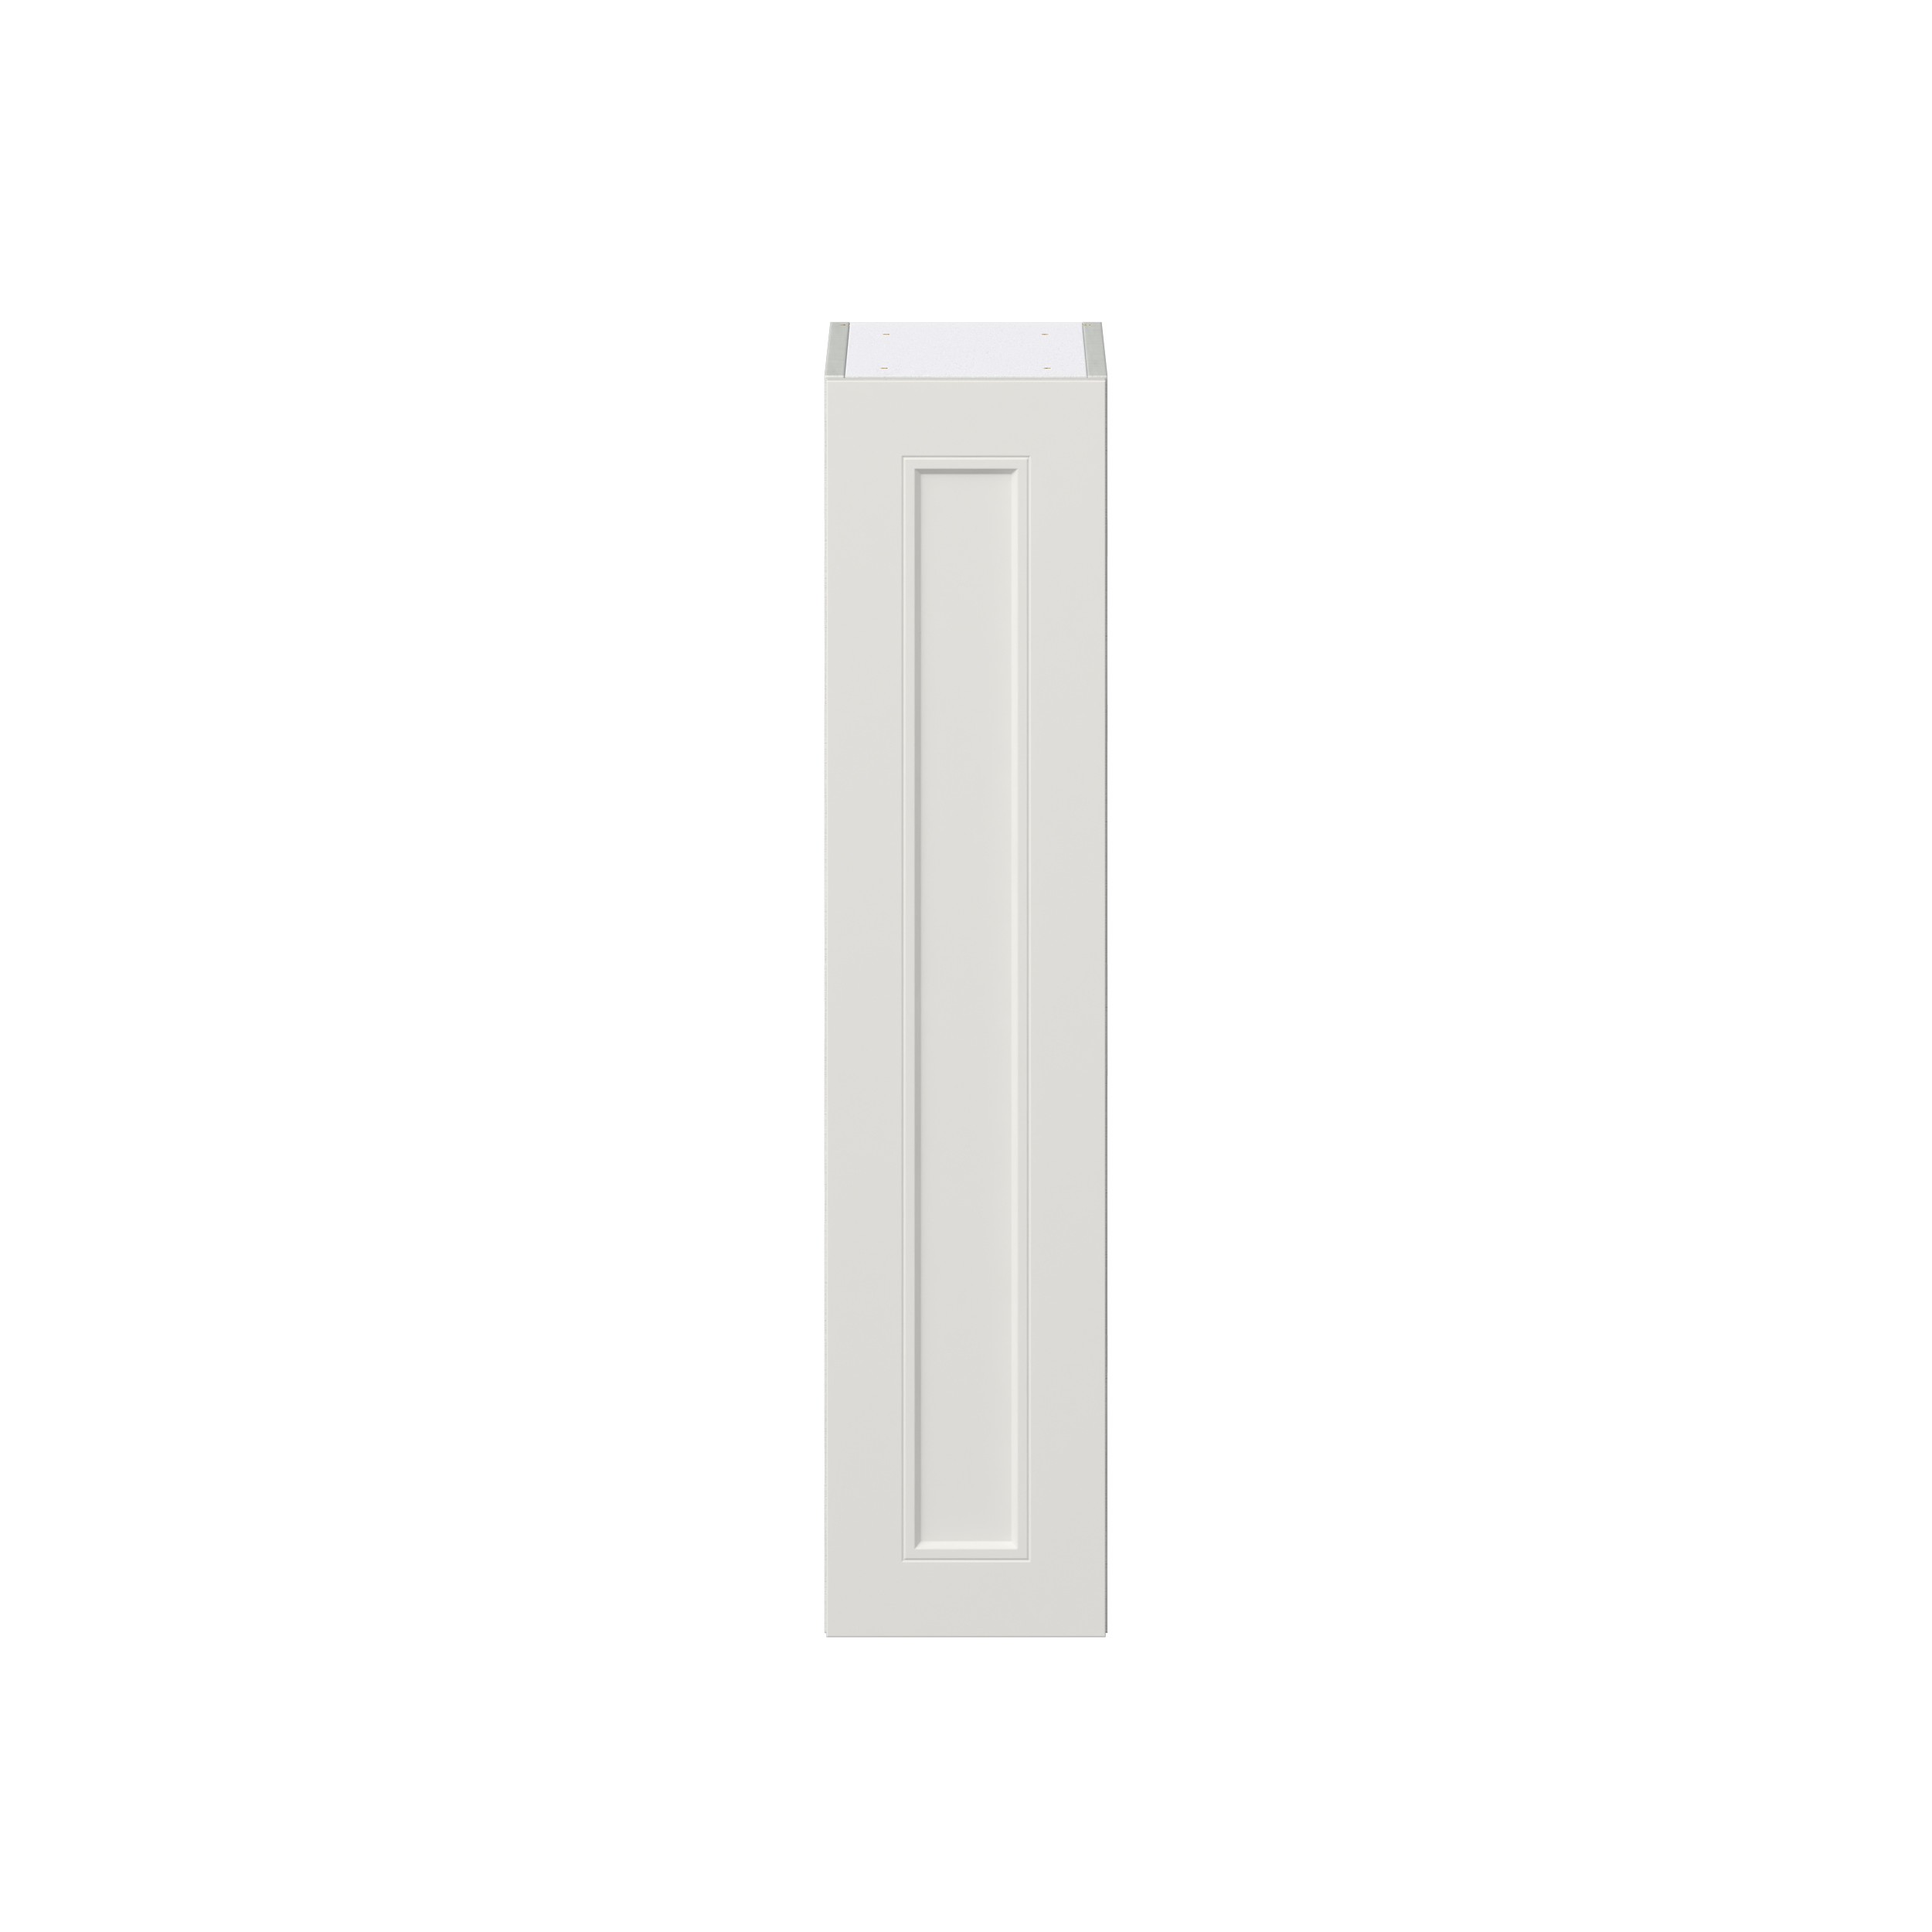 Wisteria Painted Light Gray Recessed Assembled Wall Cabinet with Full High Door (9 in. W x 40 in. H x 14 in. D)